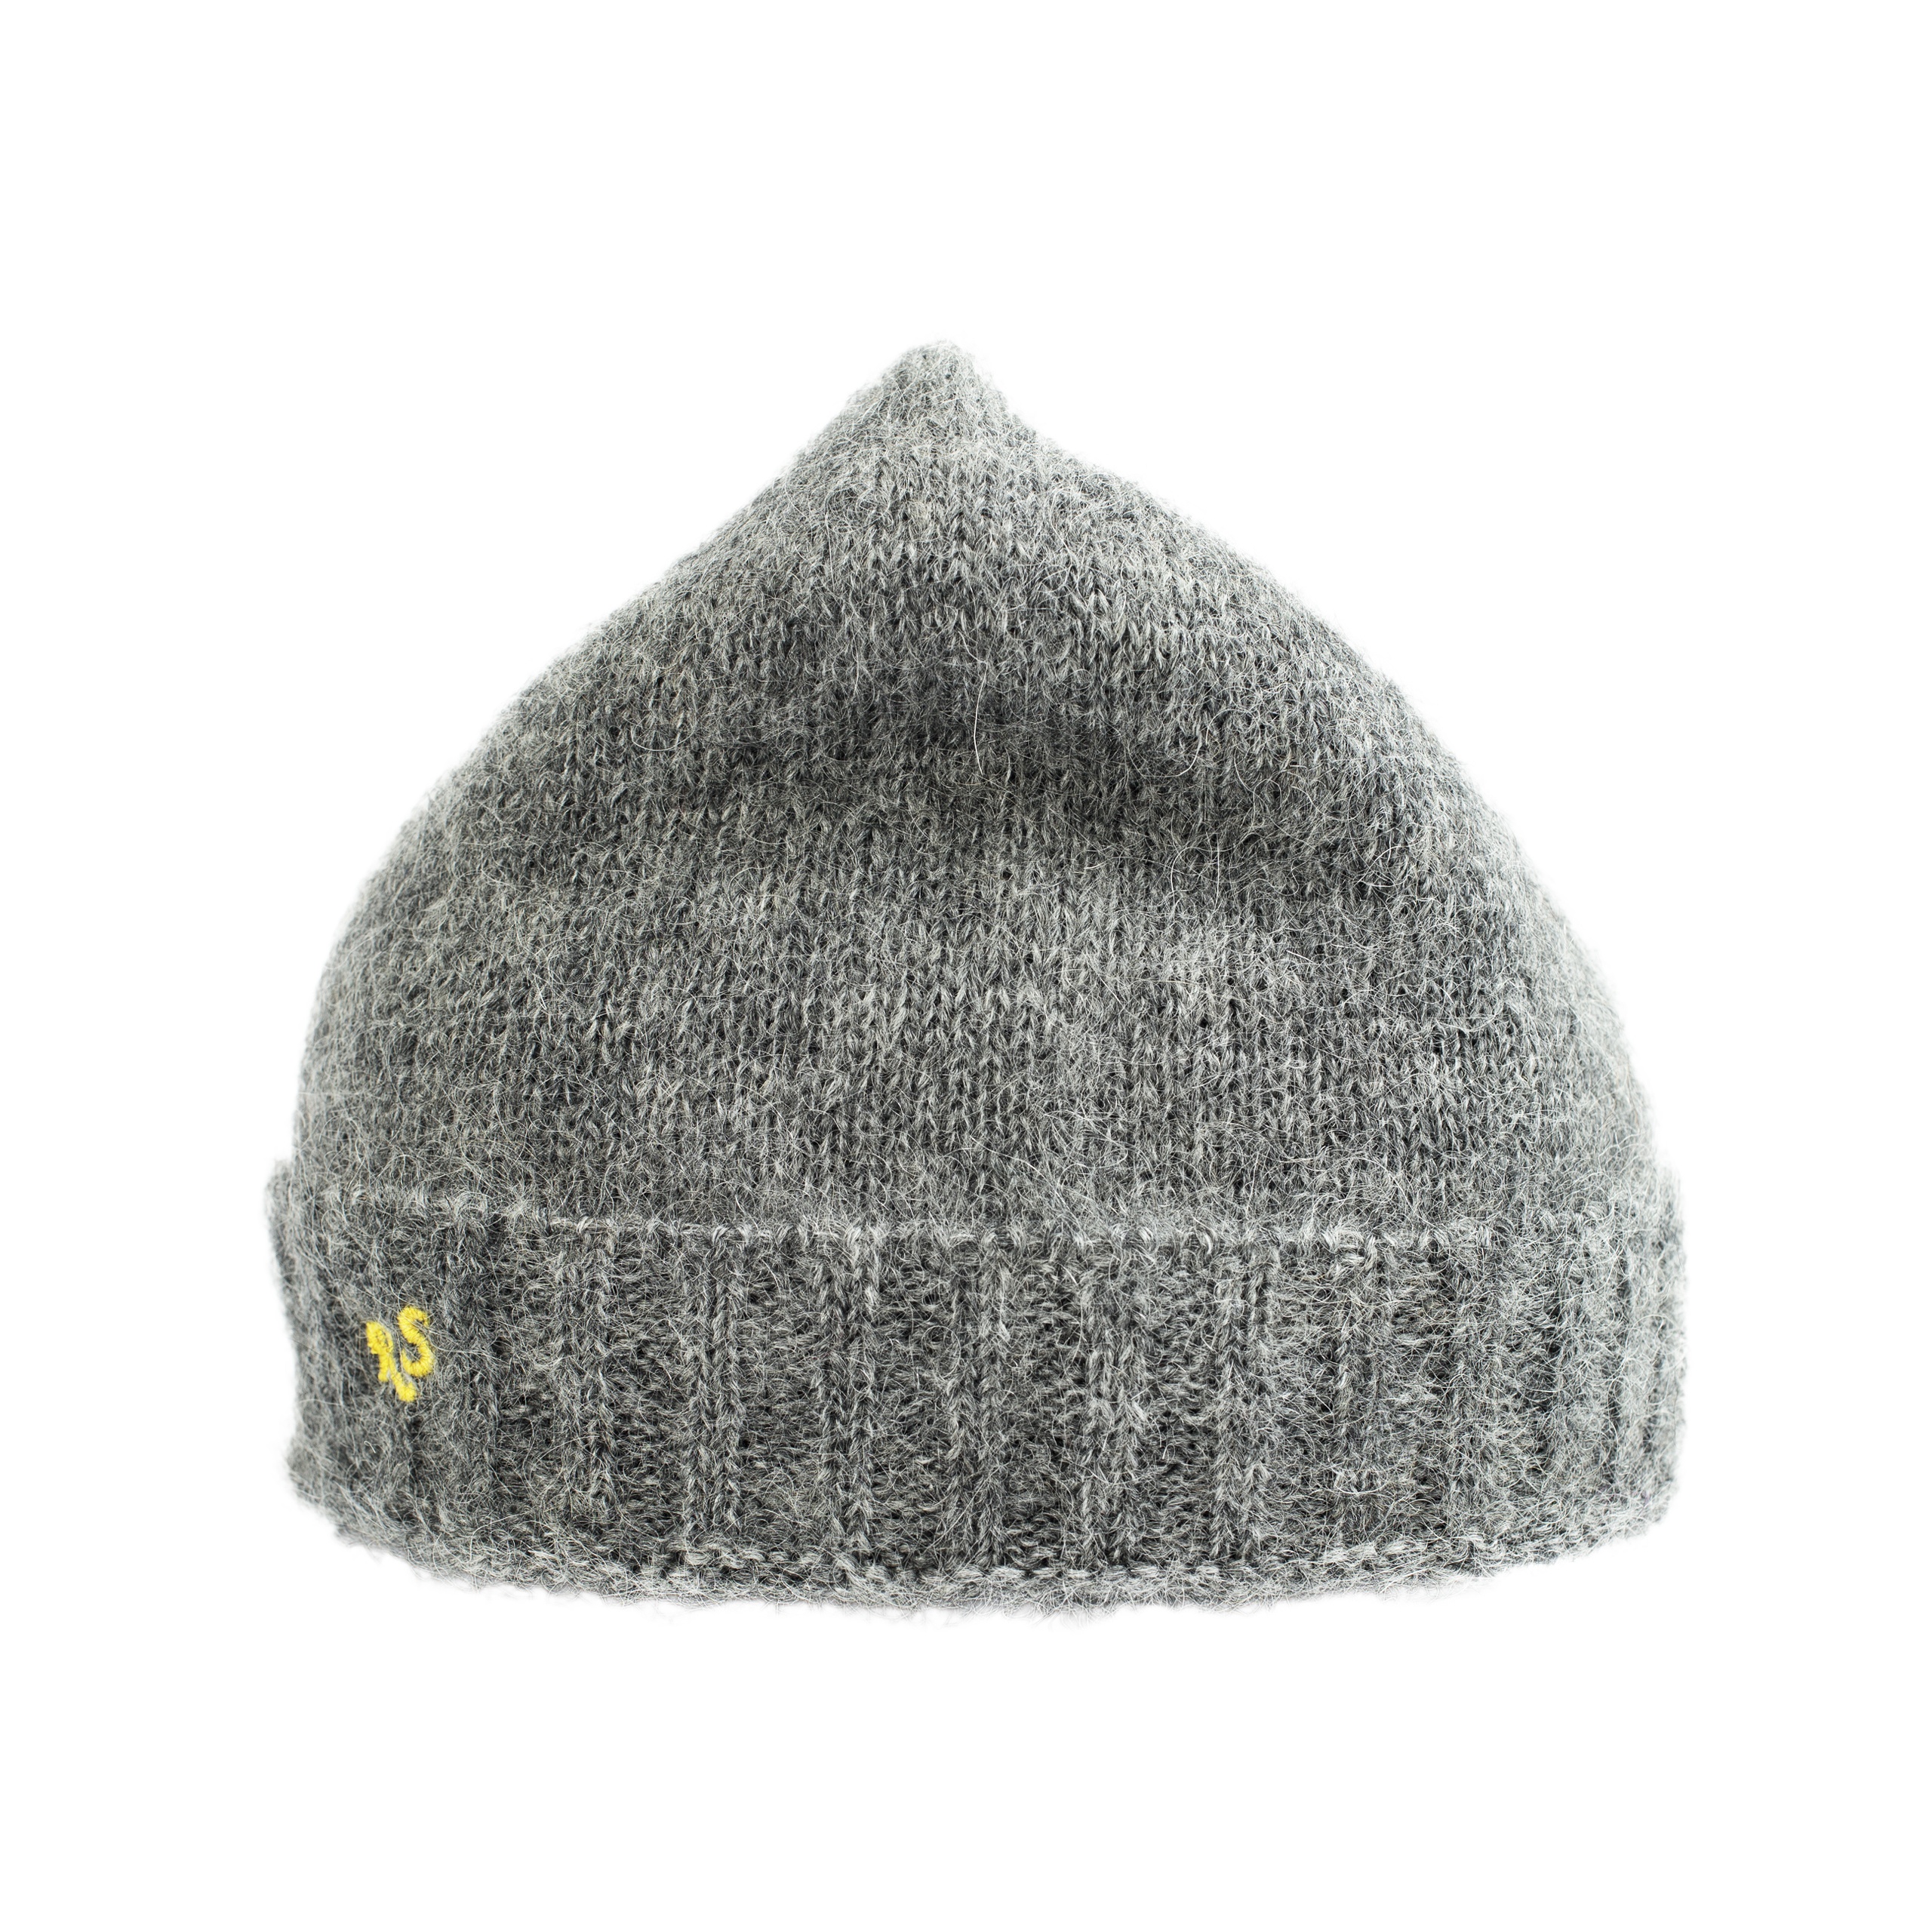 RS KNITTED BEANIE IN GREY - 3